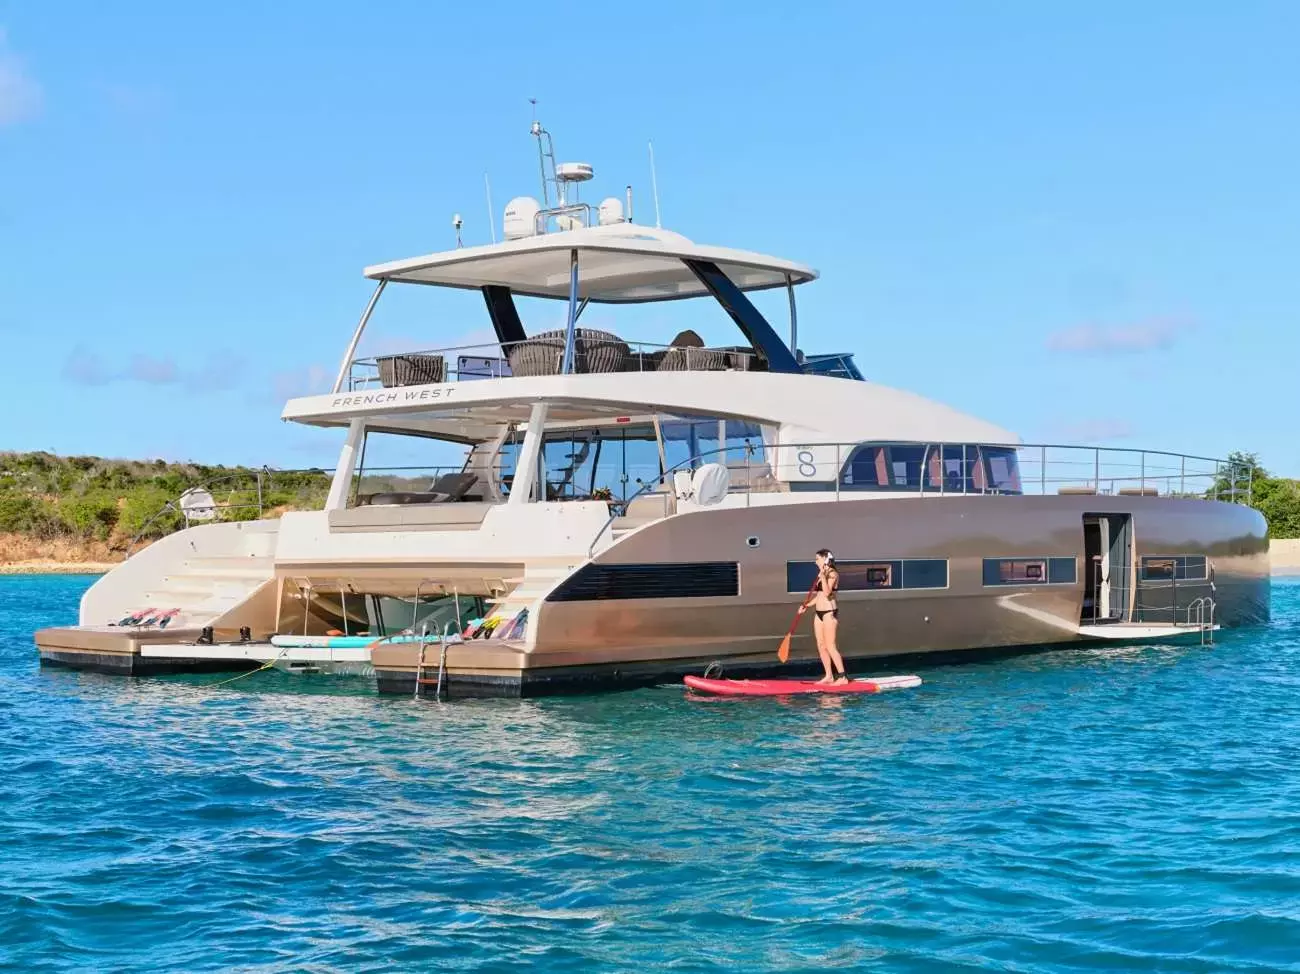 Frenchwest by Lagoon - Top rates for a Rental of a private Power Catamaran in Barbados